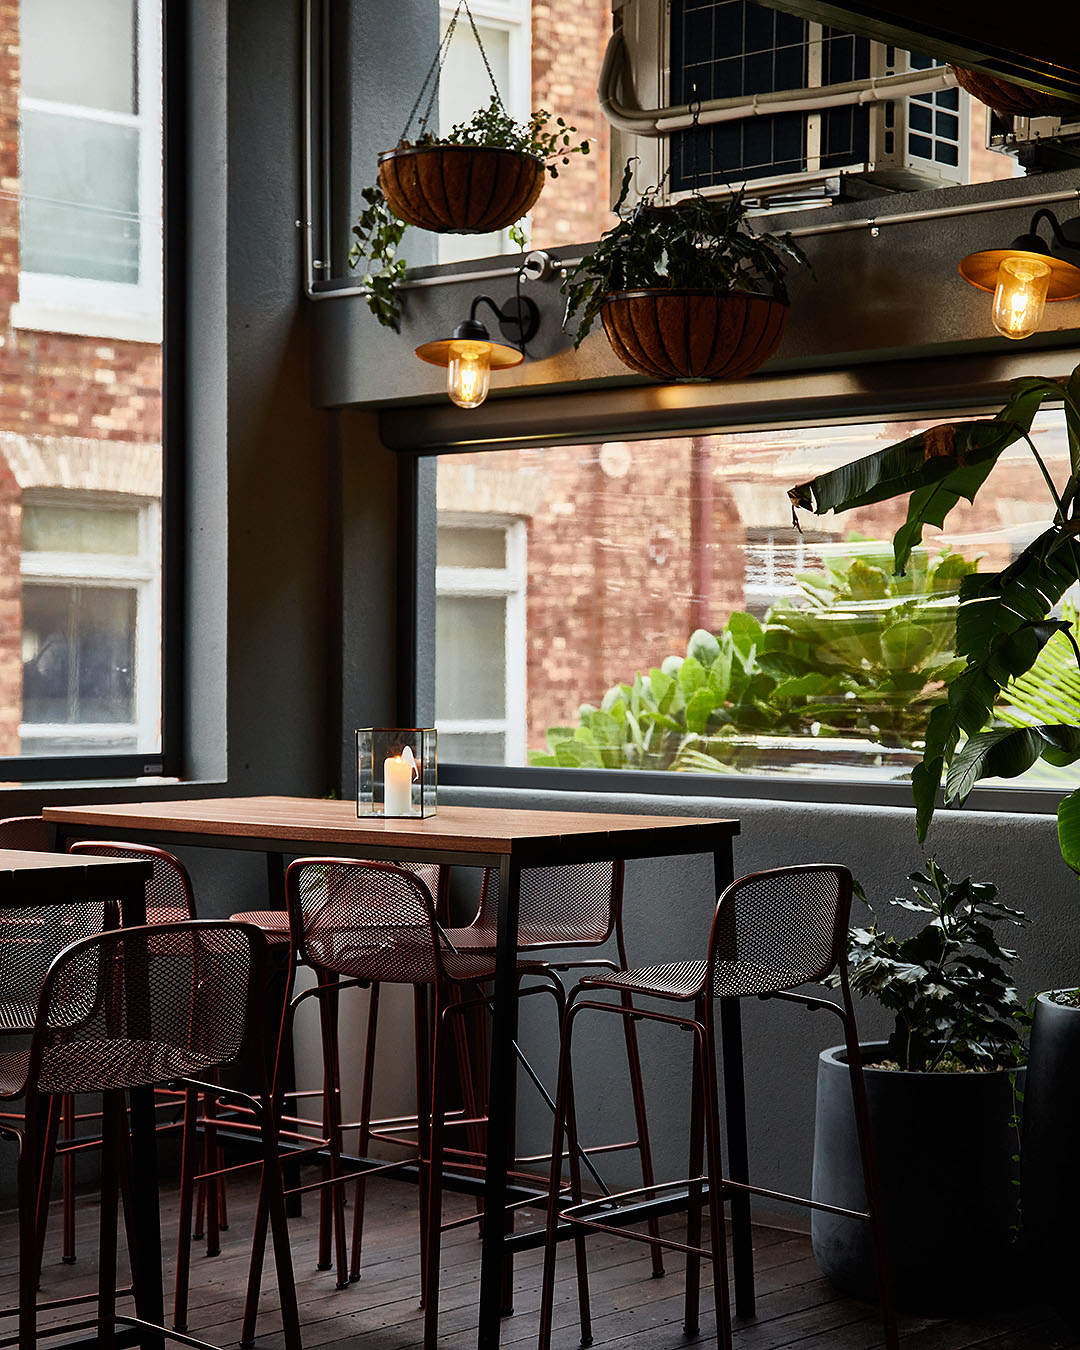 The lovely airy space that is Barcita shows high tables and lovely plants overlooking the street.